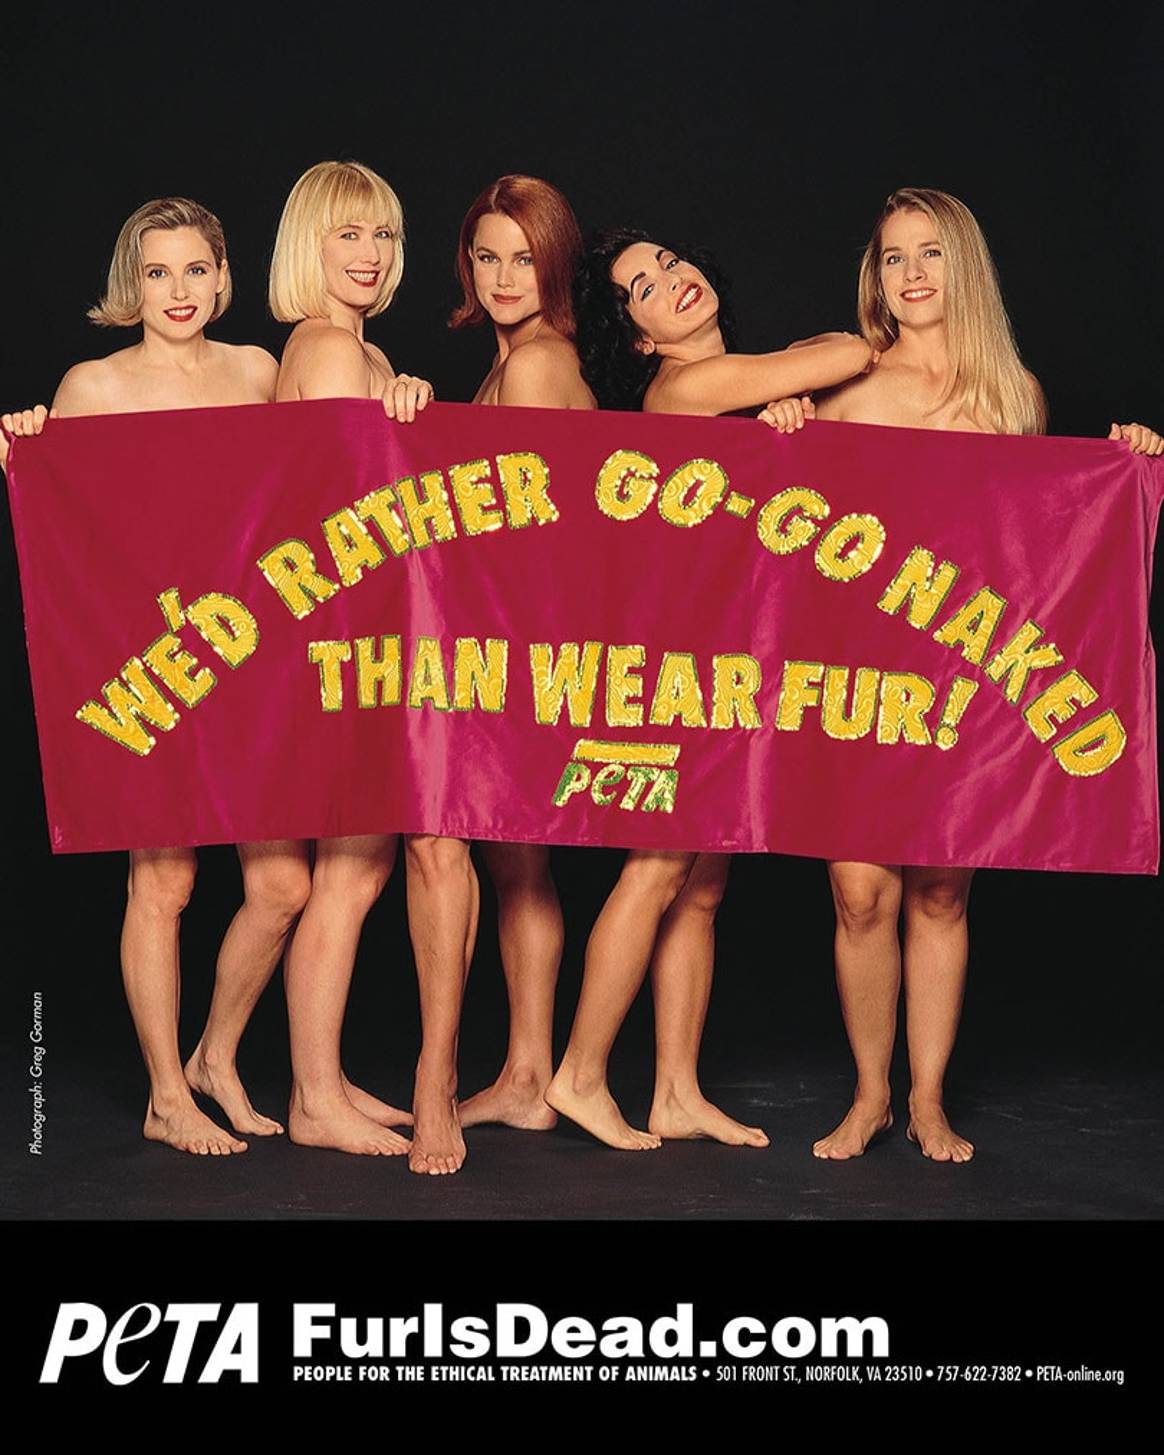 How PETA has changed the fashion industry over the years